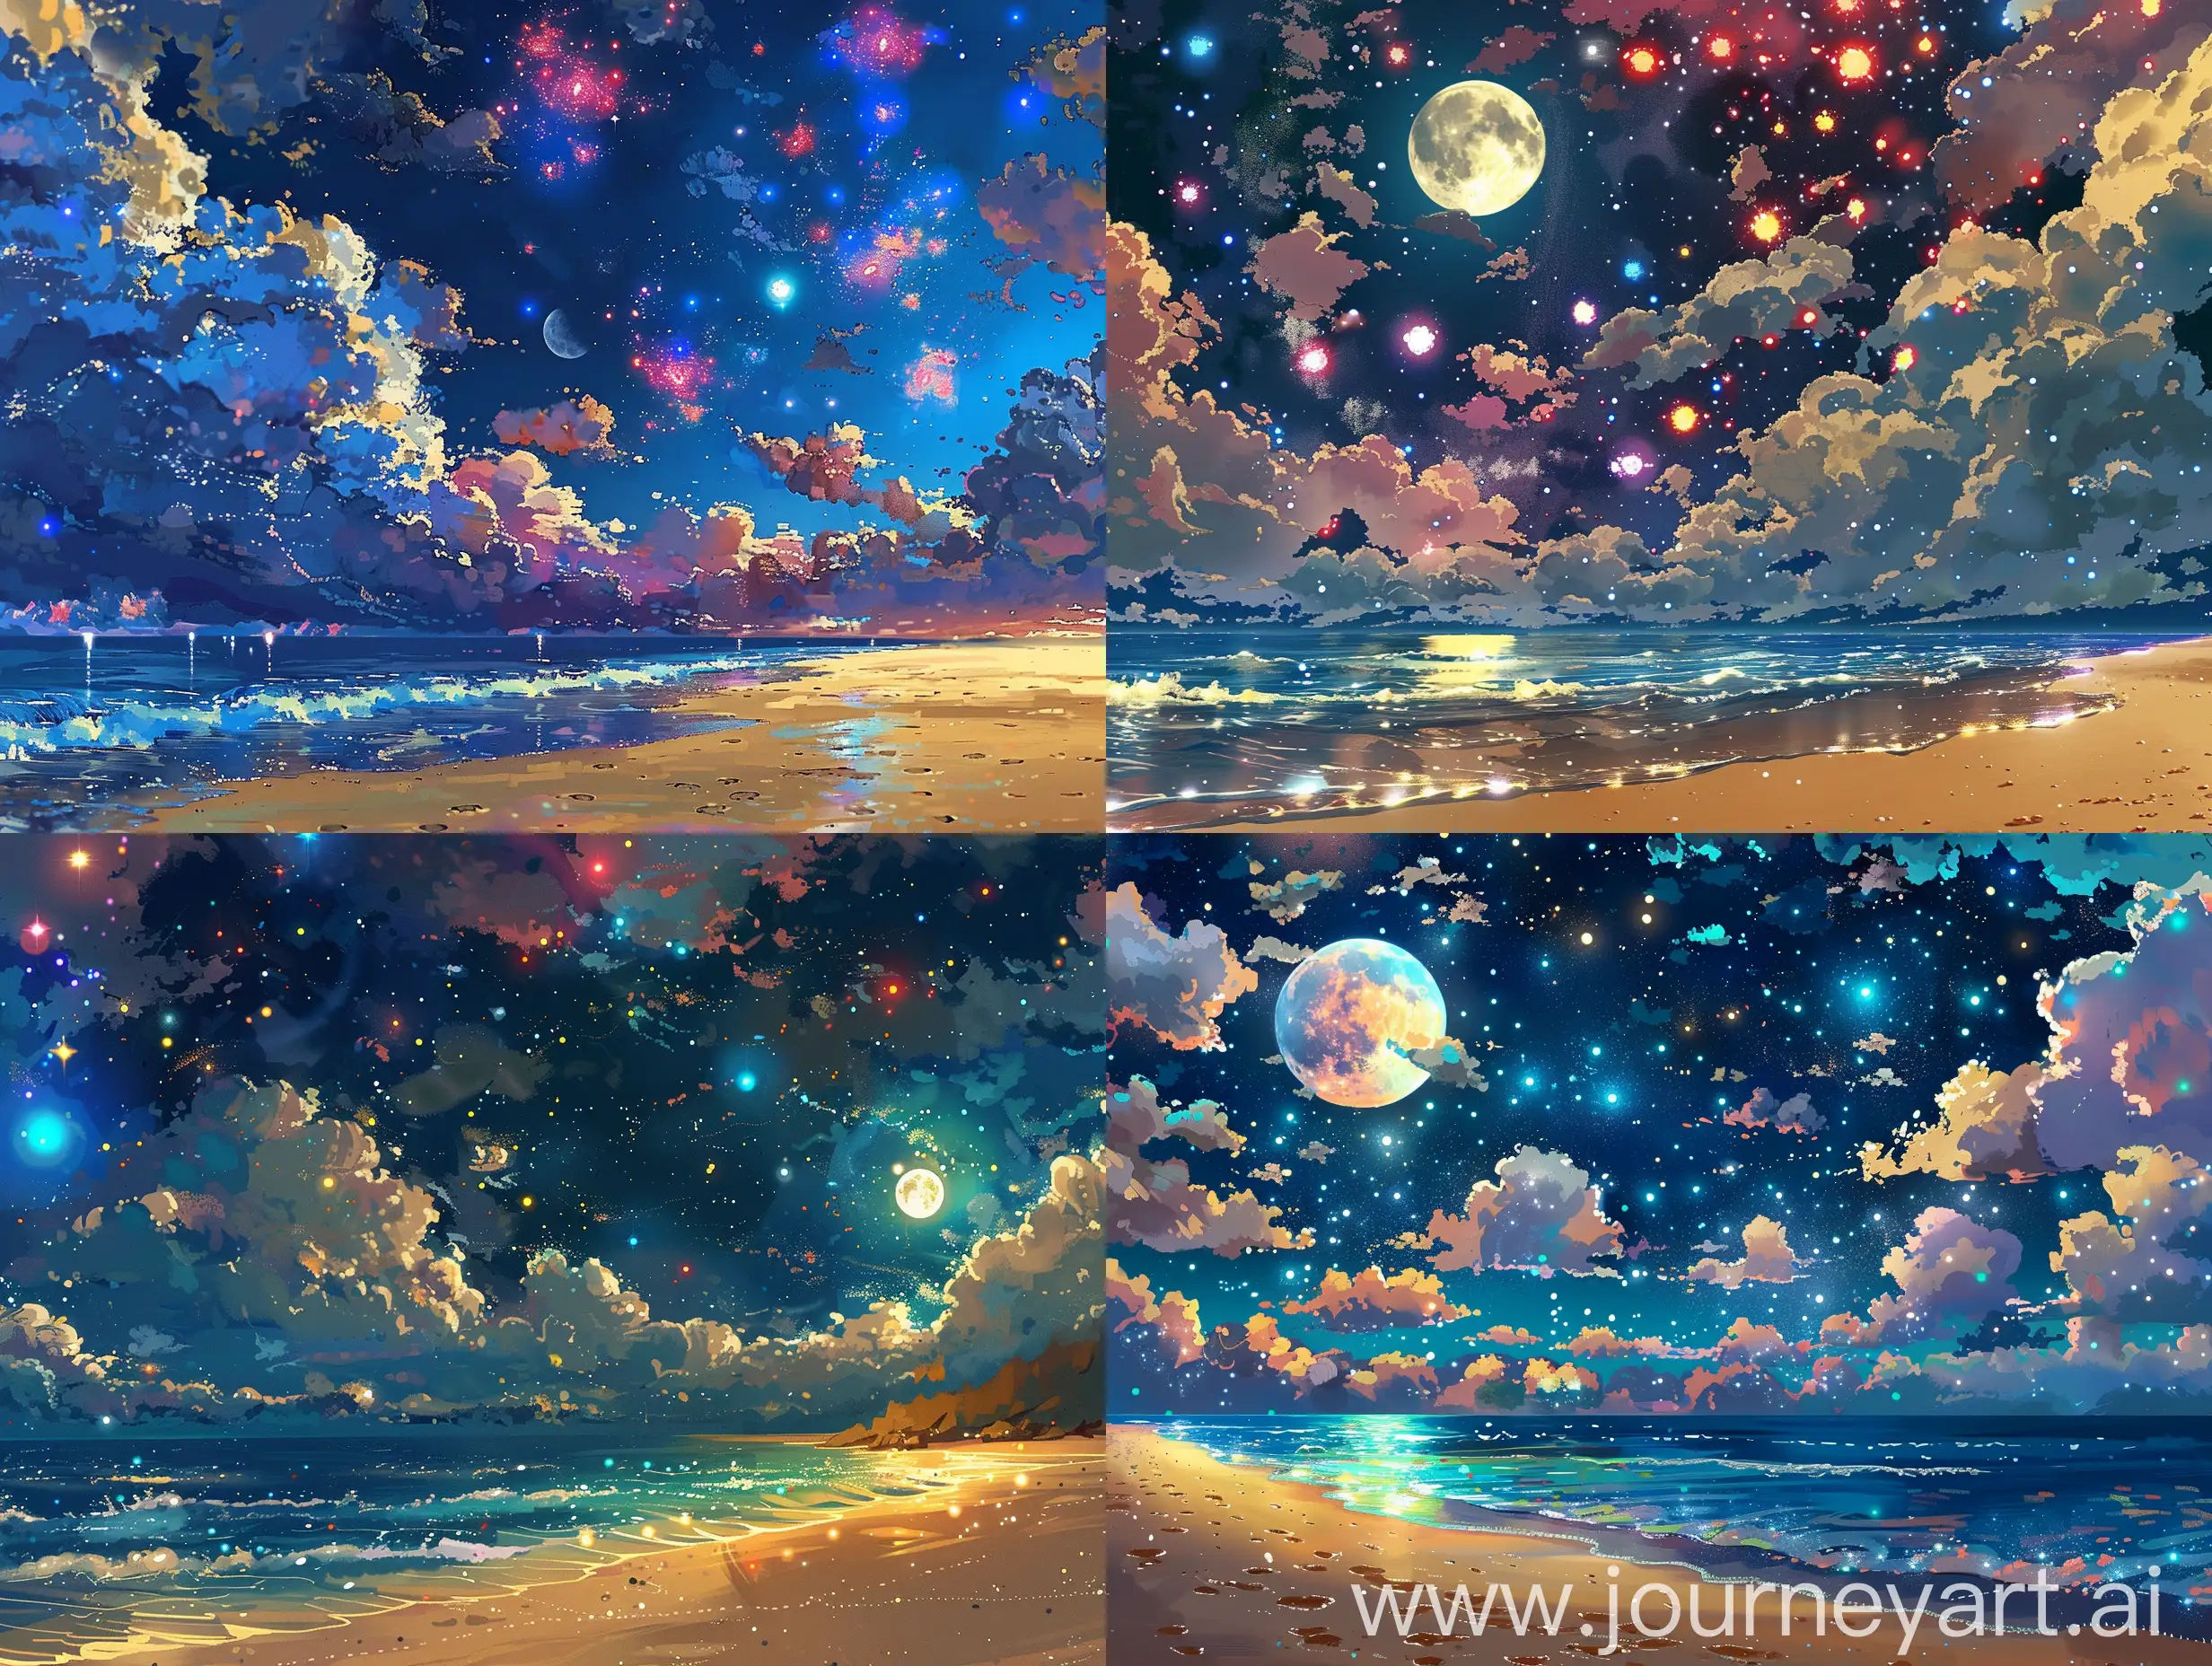 Enchanting-Anime-Night-Sky-on-Golden-Beach-with-Celestial-Clouds-and-Glowing-Stars